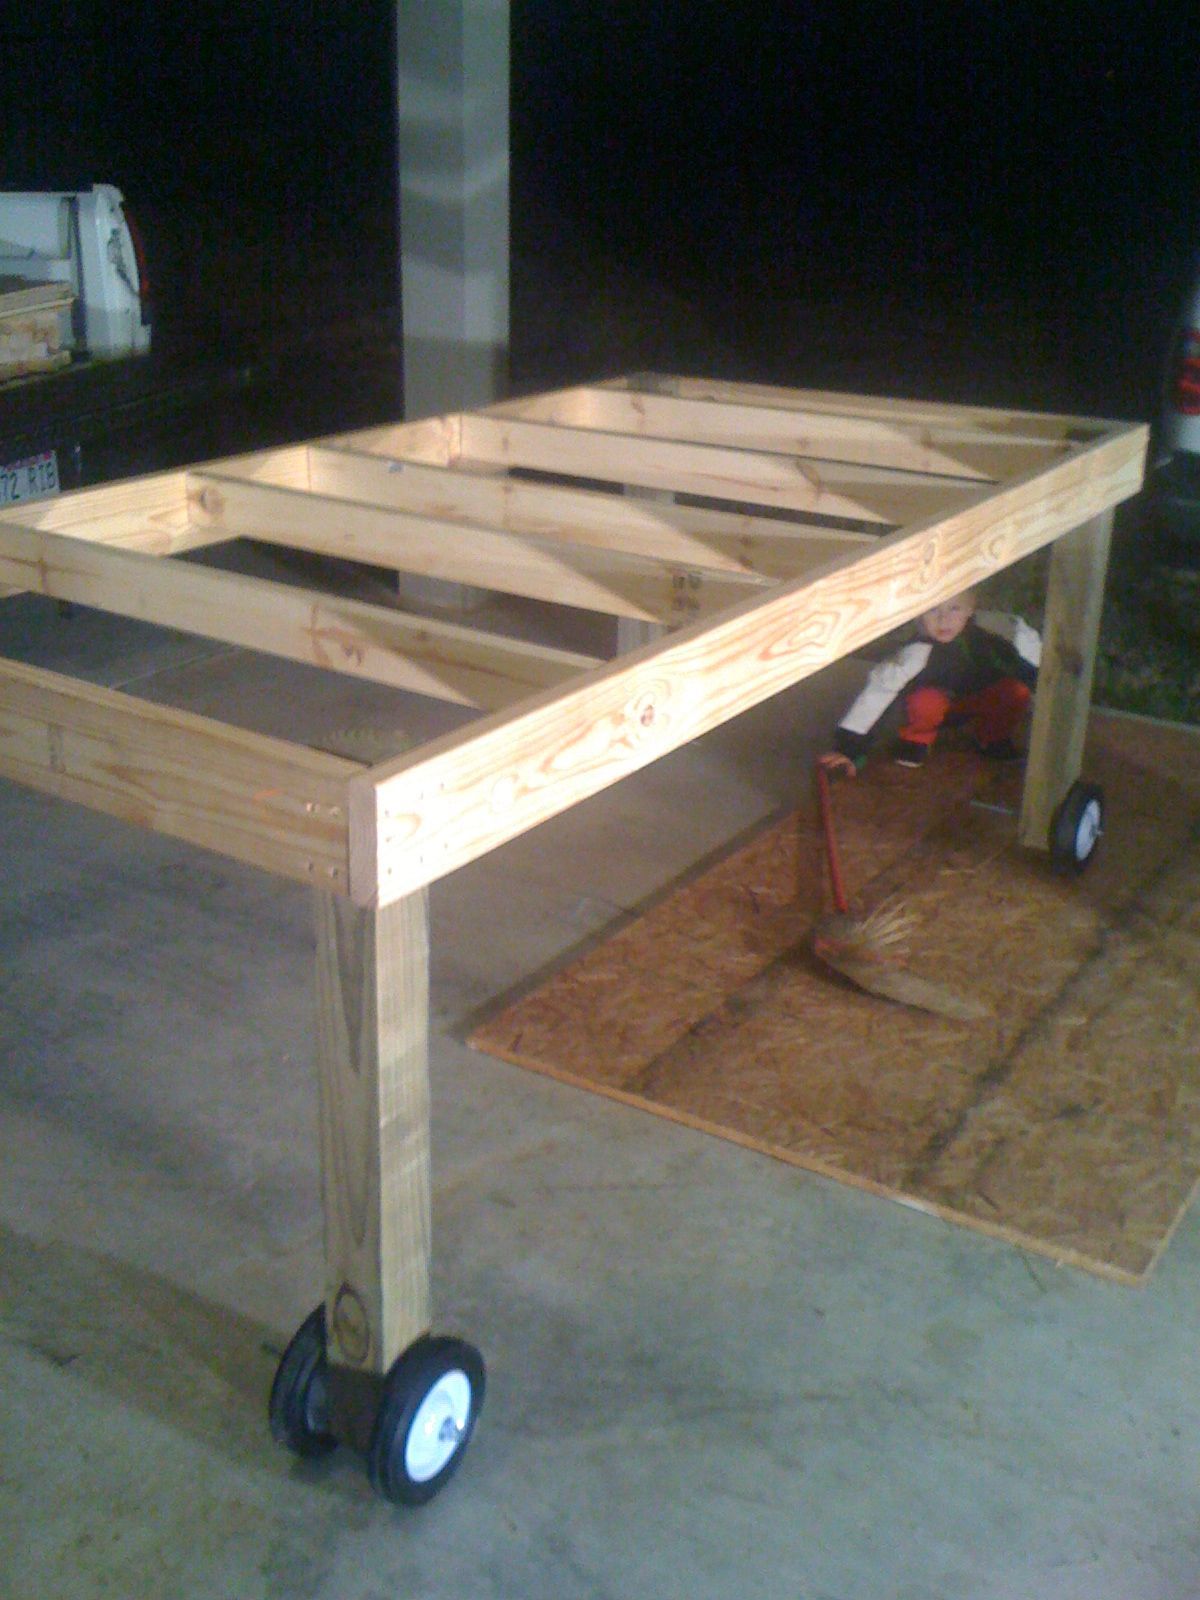 4x8 base frame with wheels